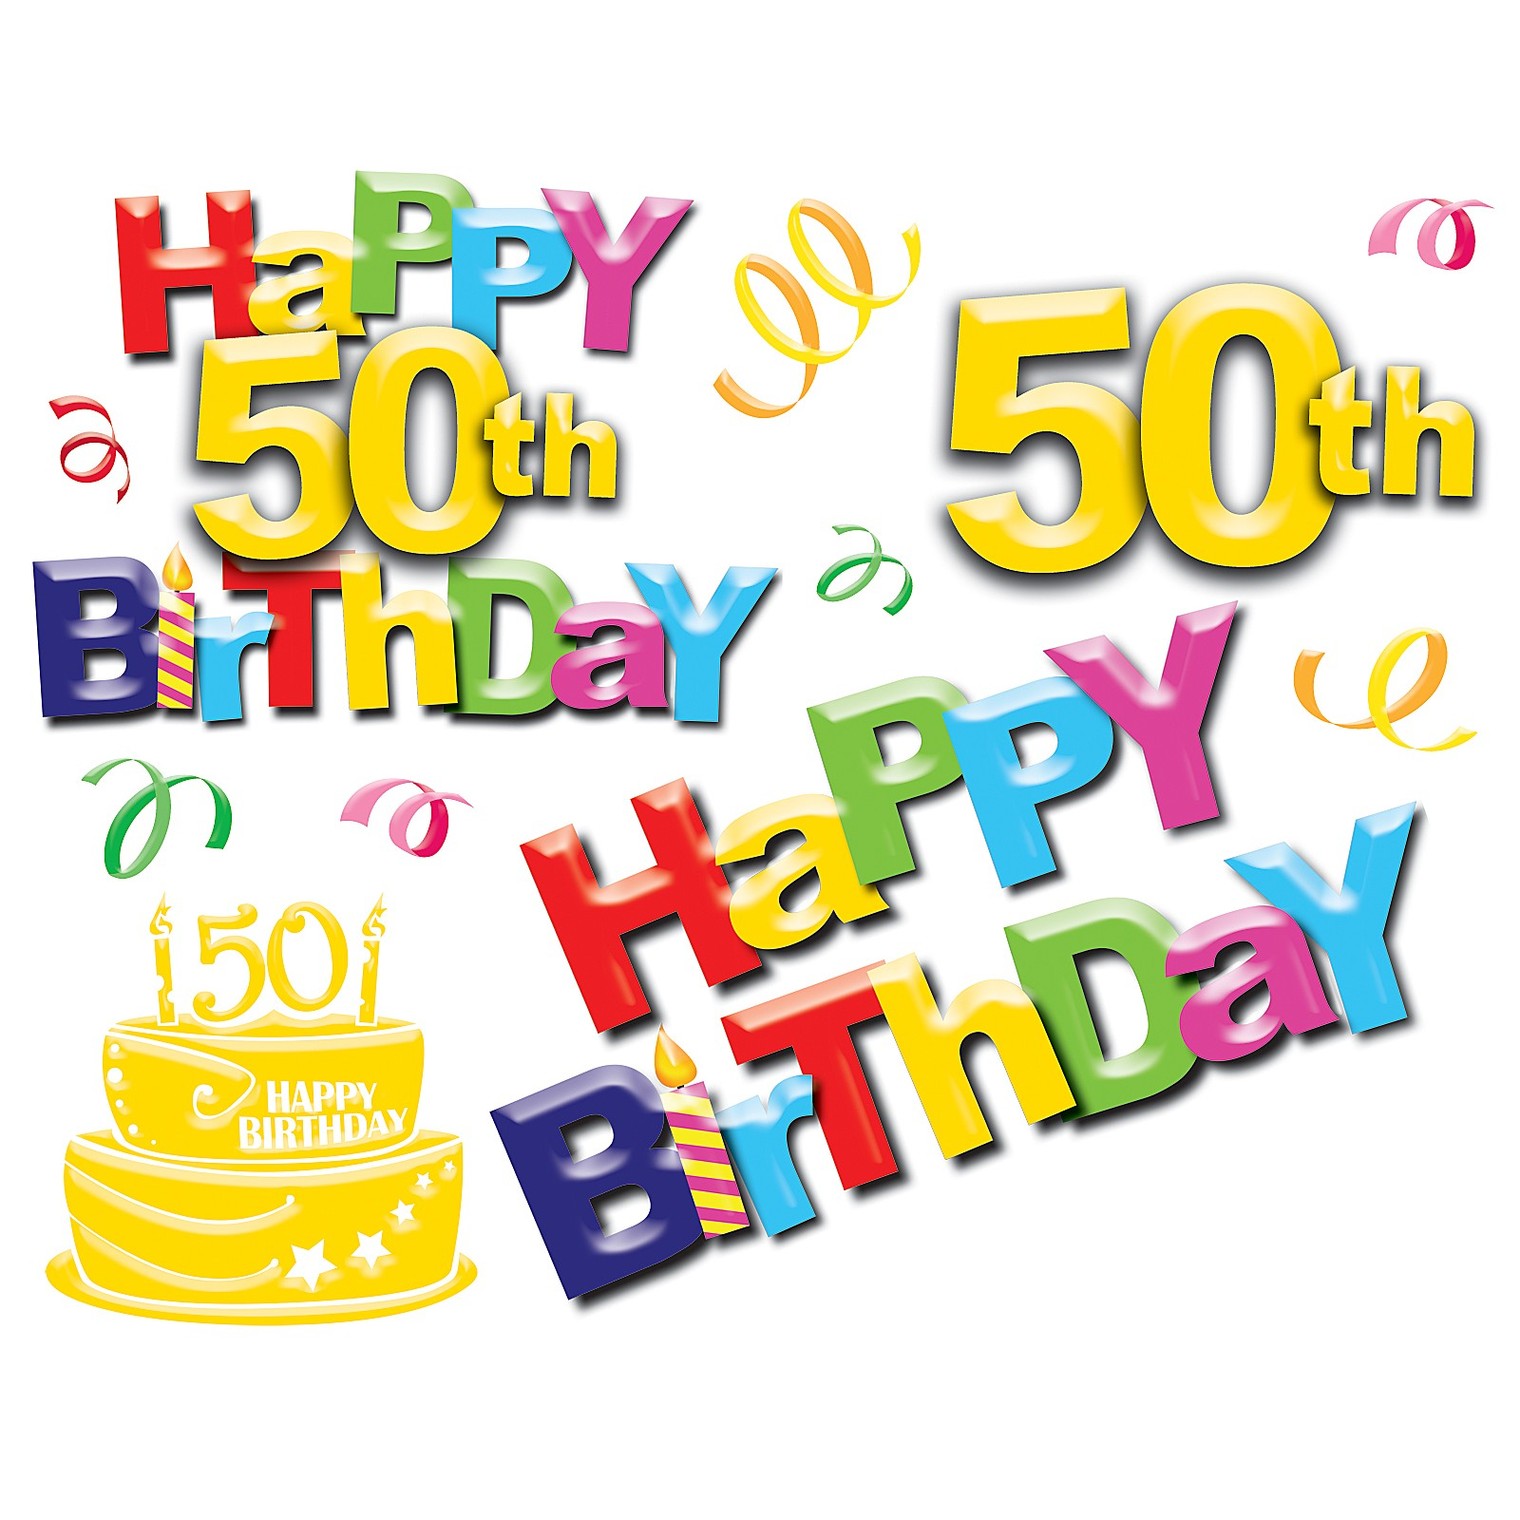 ... 50th birthday clip art images ...